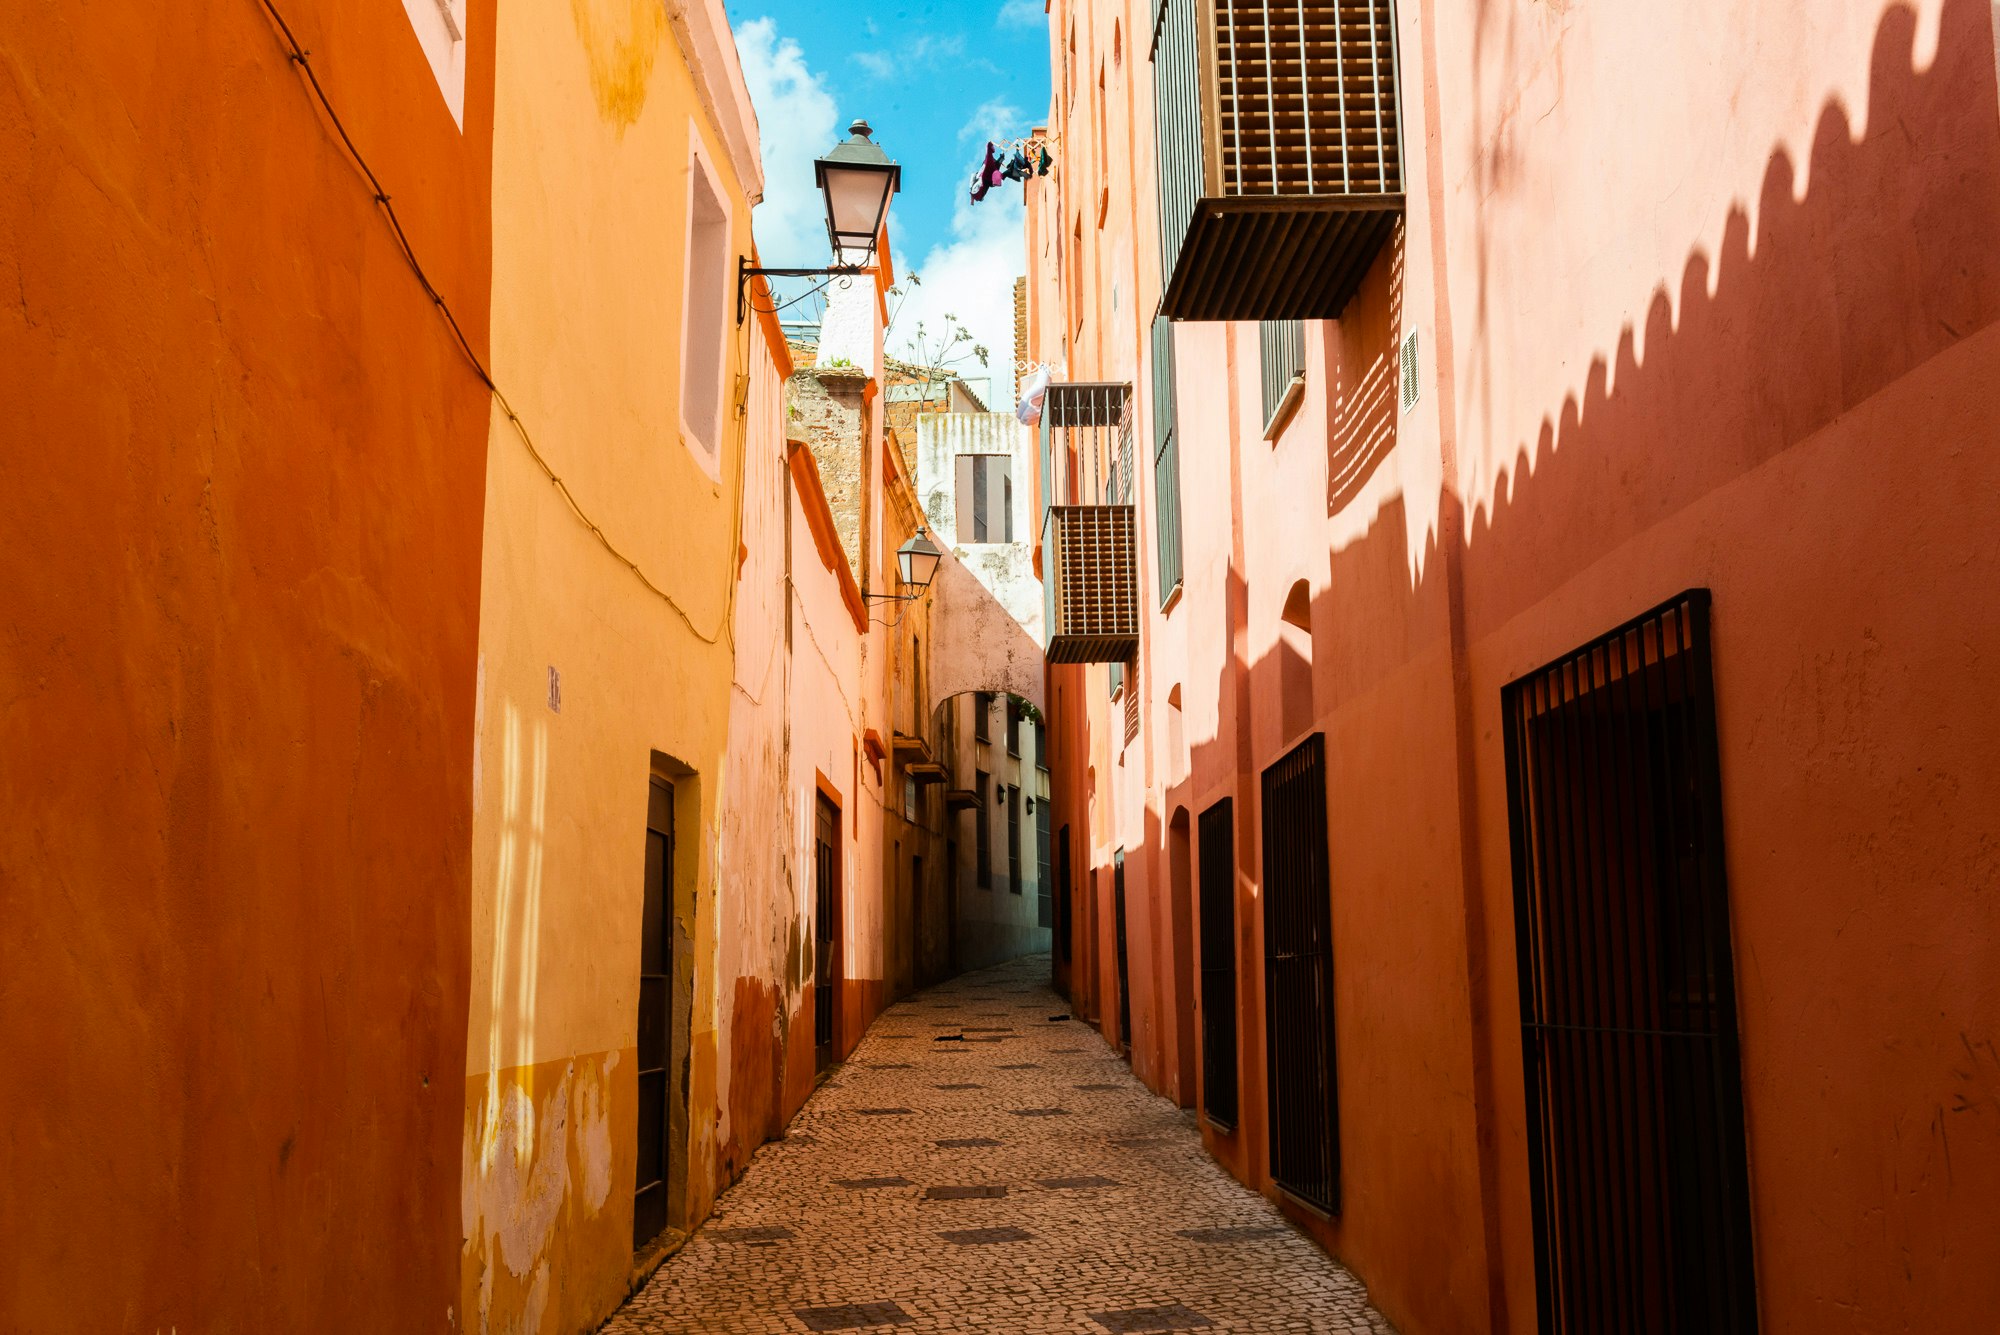 An alley with buildings painted in oranges, yellows and pinks, Badajoz, Extremadura, Spain